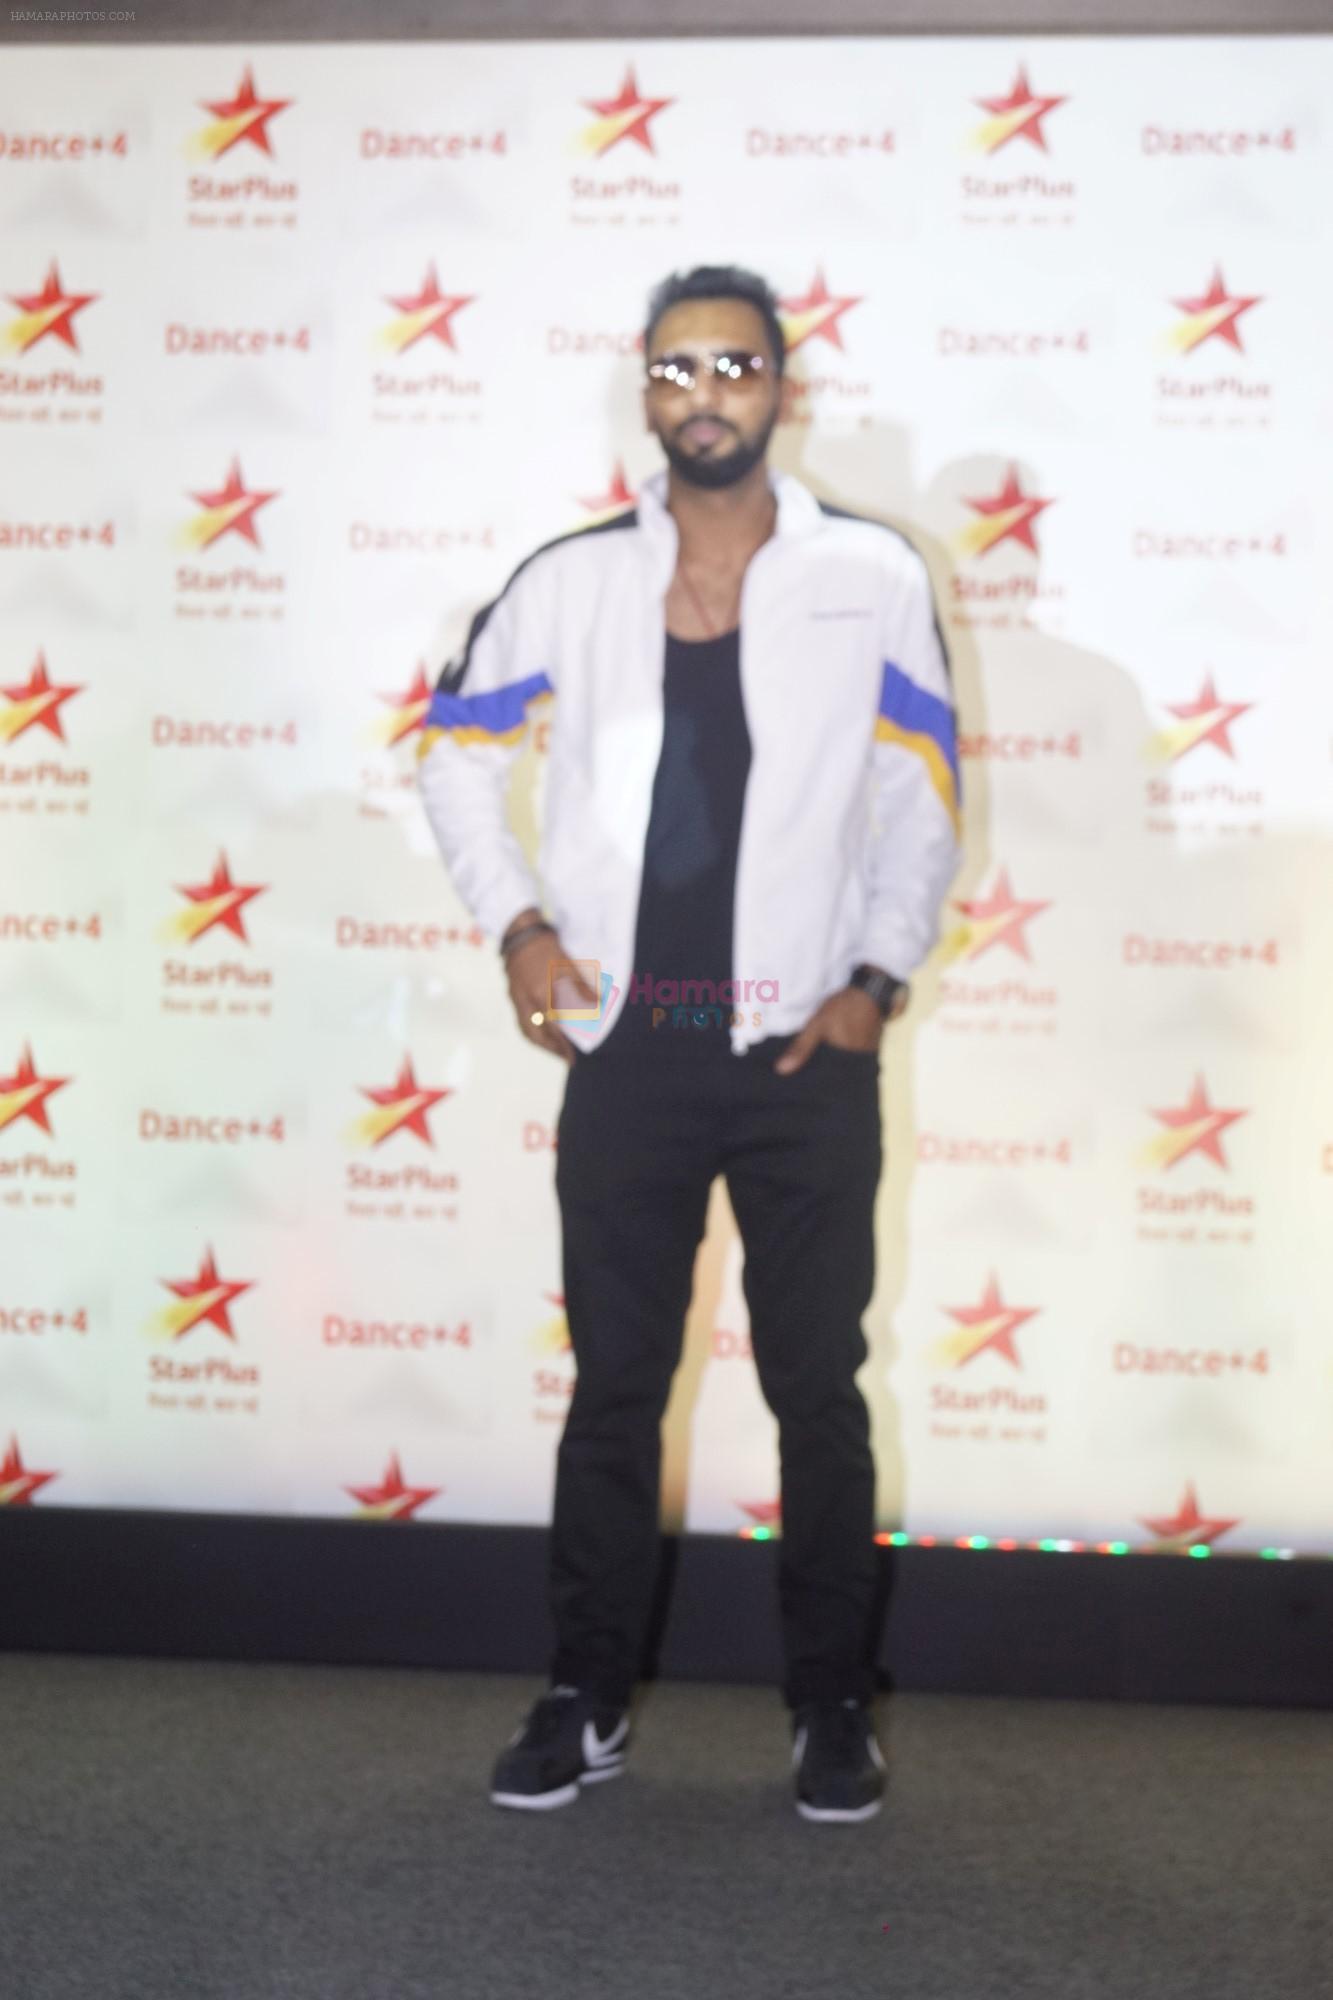 Punit Pathak at the Media Interaction for Dance Plus Season 4 on 18th Sept 2018